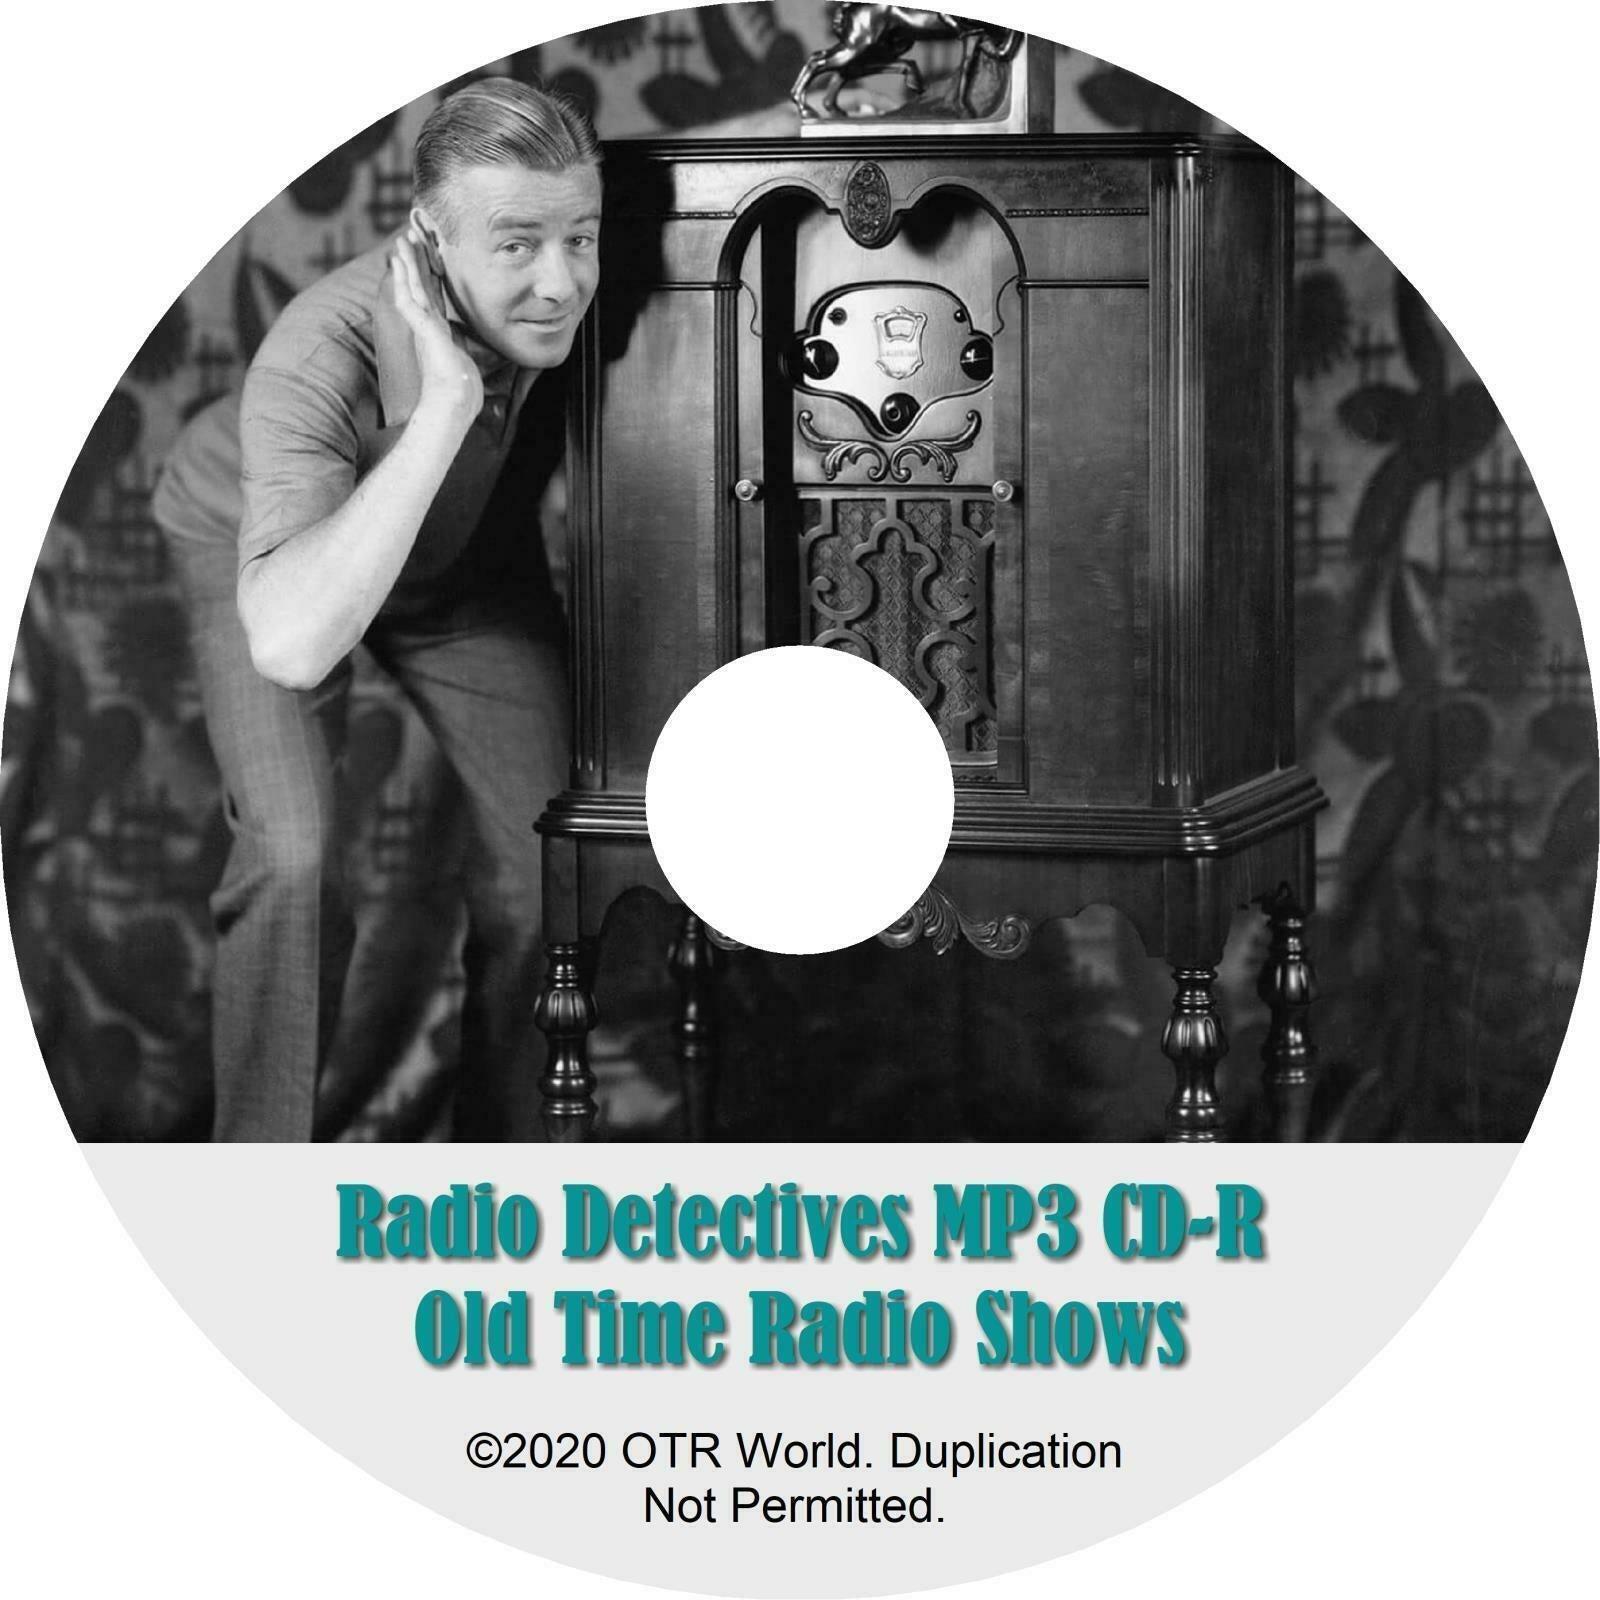 Radio Detectives Mix OTR Old Time Radio Shows MP3 On CD-R 17 Episodes